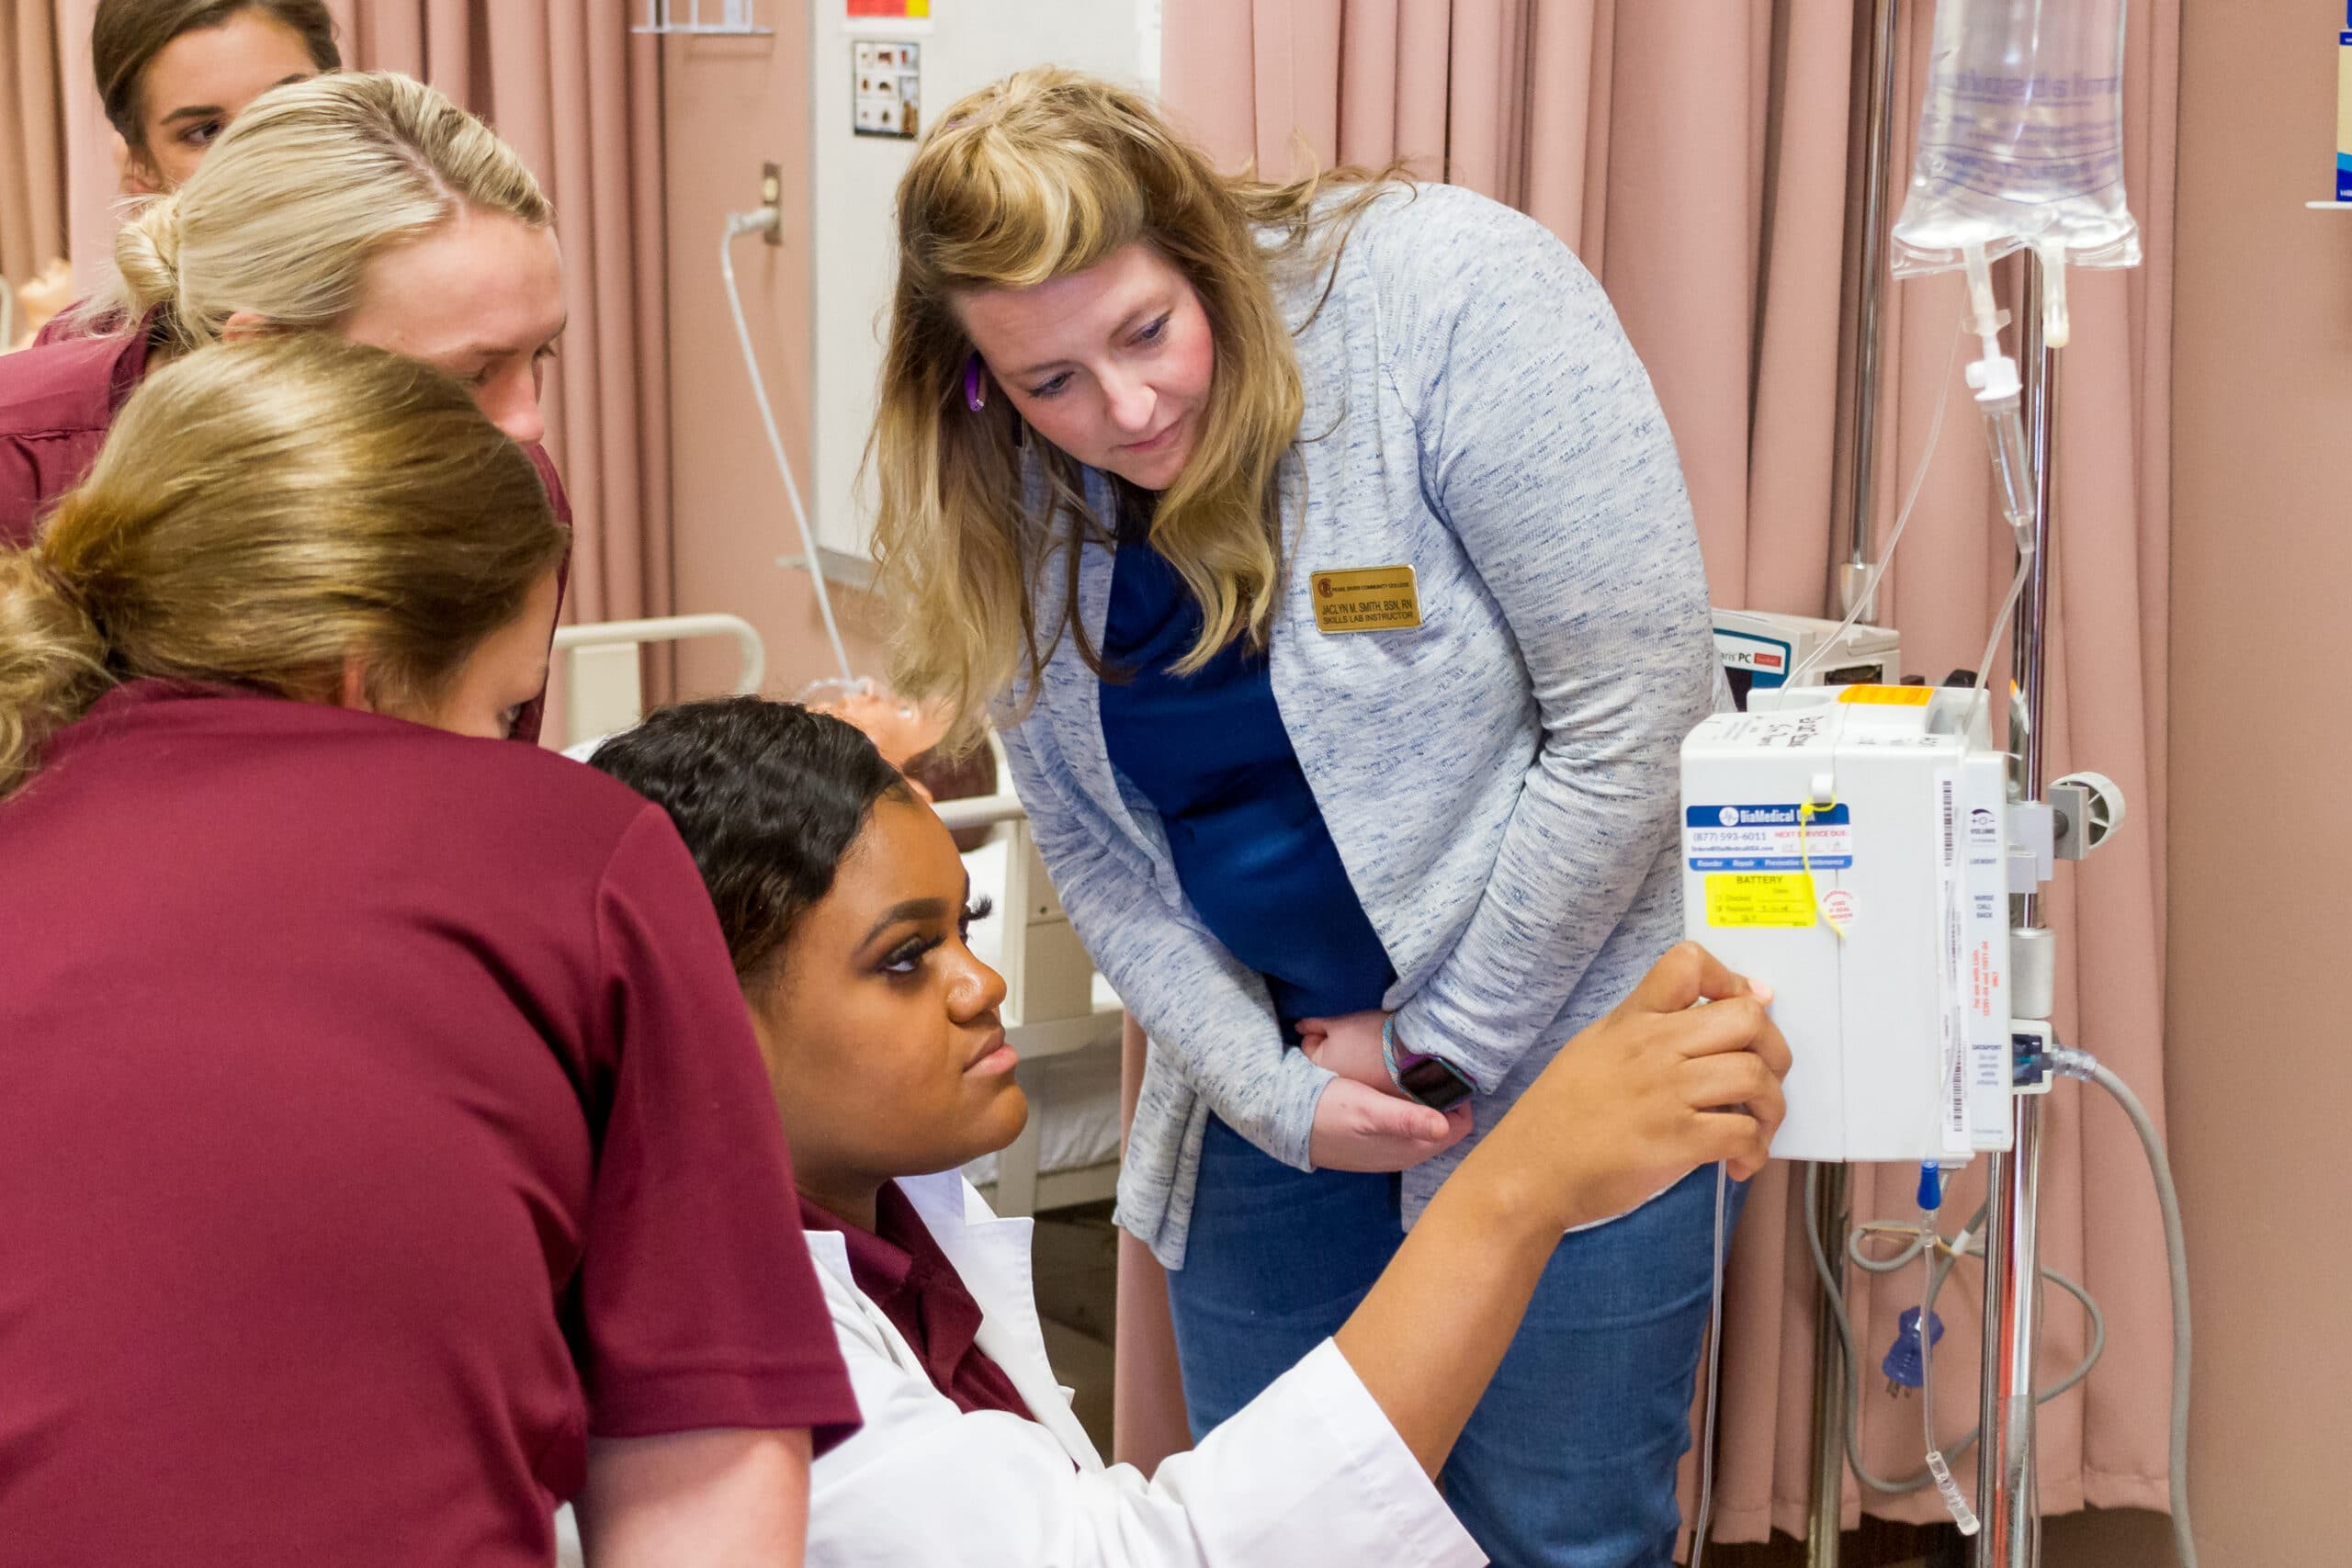 ADN student adjusts an IV Infusion Pump while instructor and other students observe at PRCC